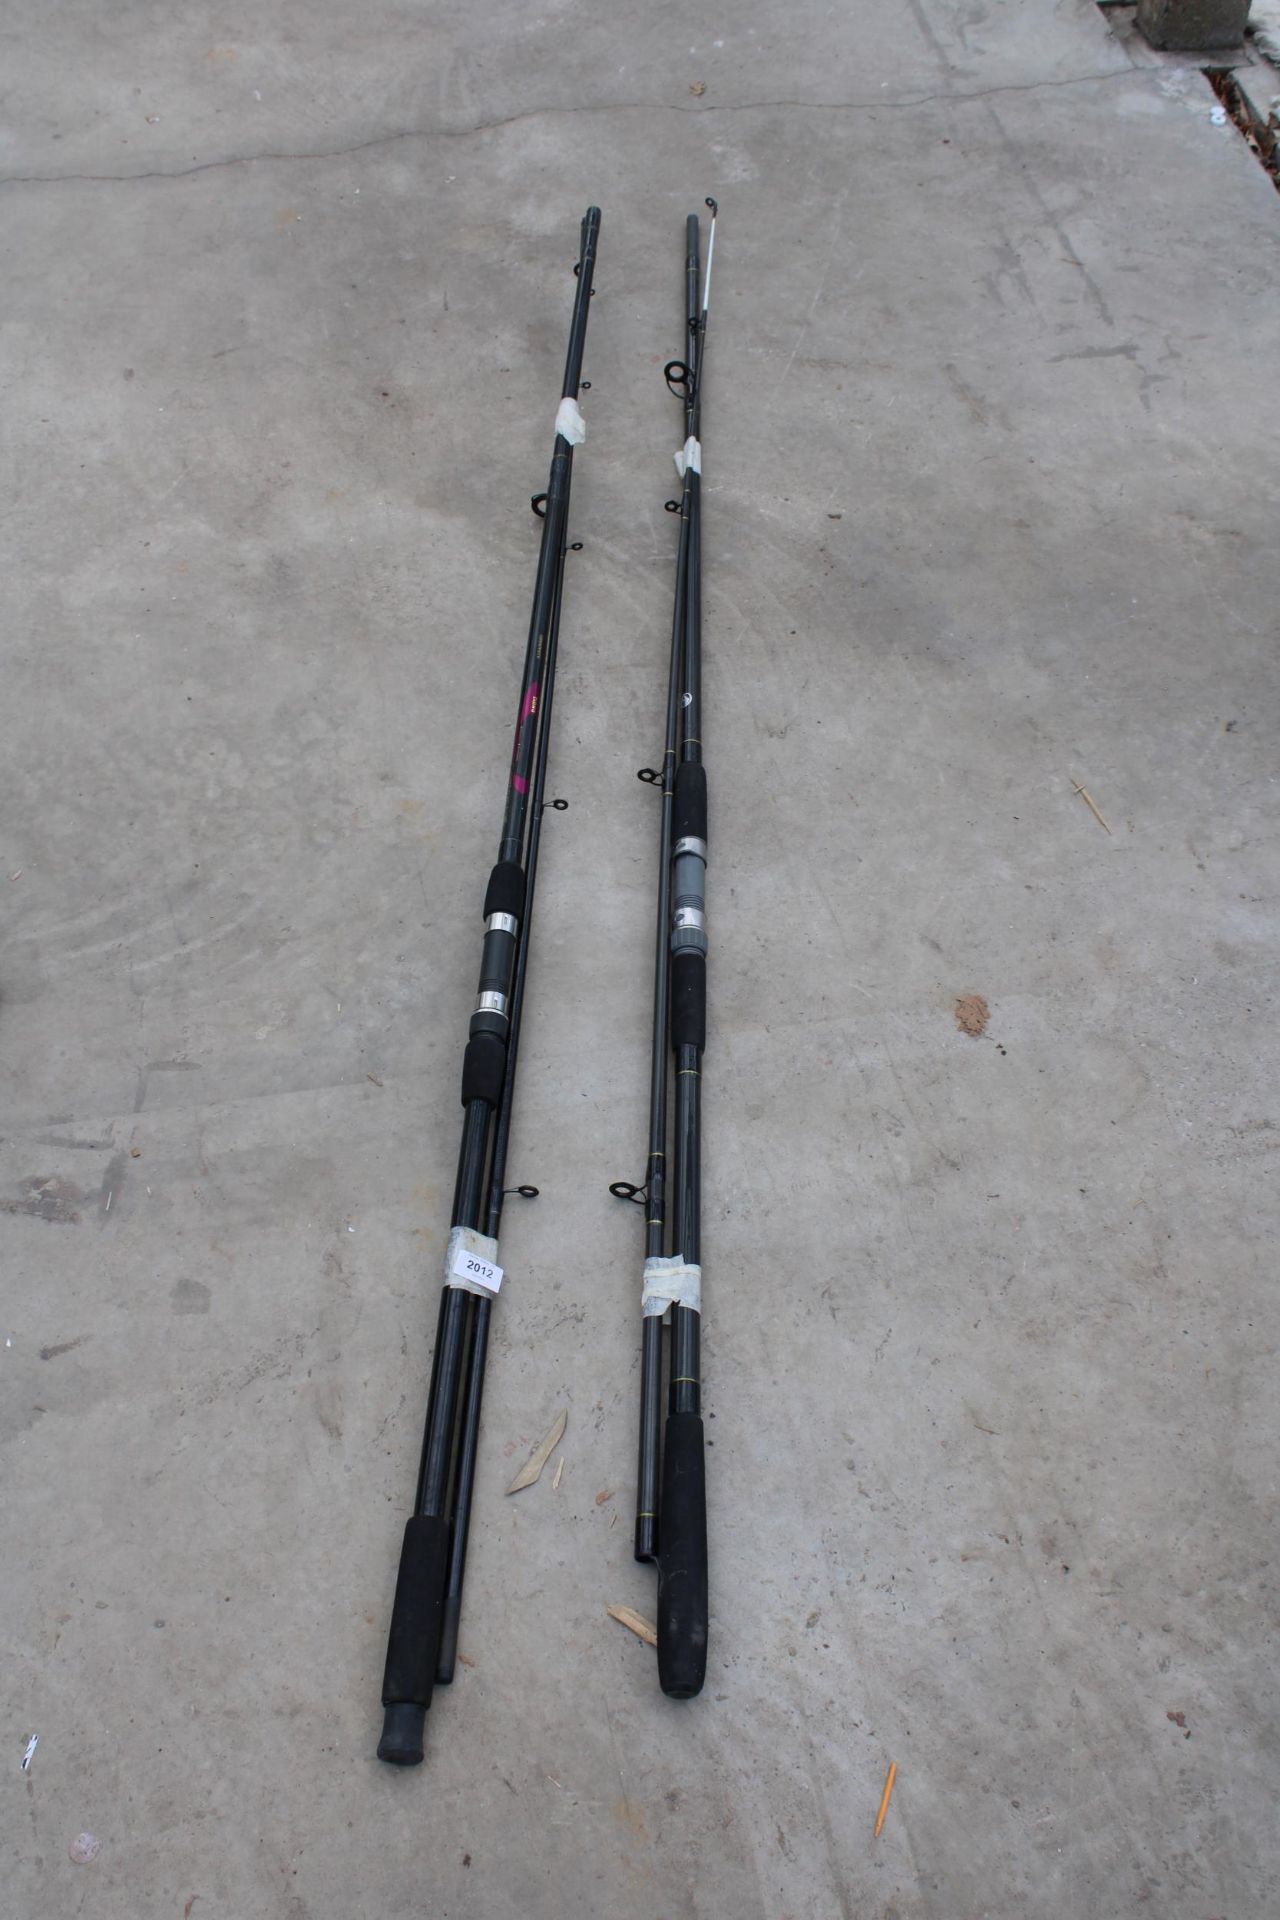 TWO CARP FISHING RODS TO INCLUDE AN ELEVEN FOOT CARBON STORM ROD AND A DAIWA GRAPHITE ROD